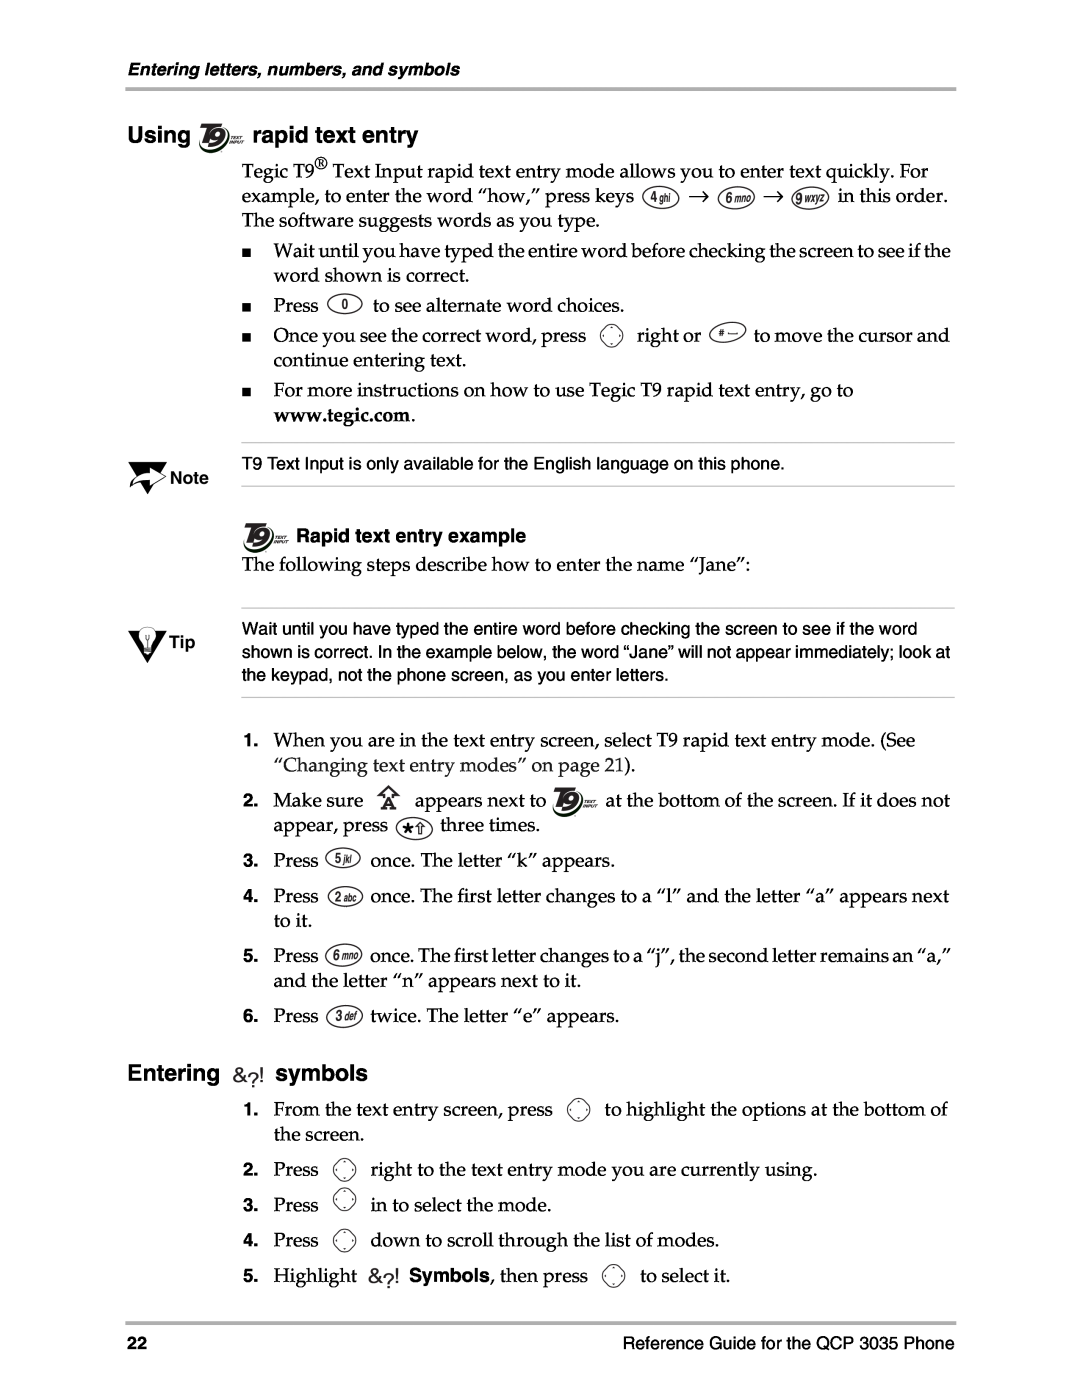 Kyocera 3035 manual Using rapid text entry, Entering symbols, Rapid text entry example 